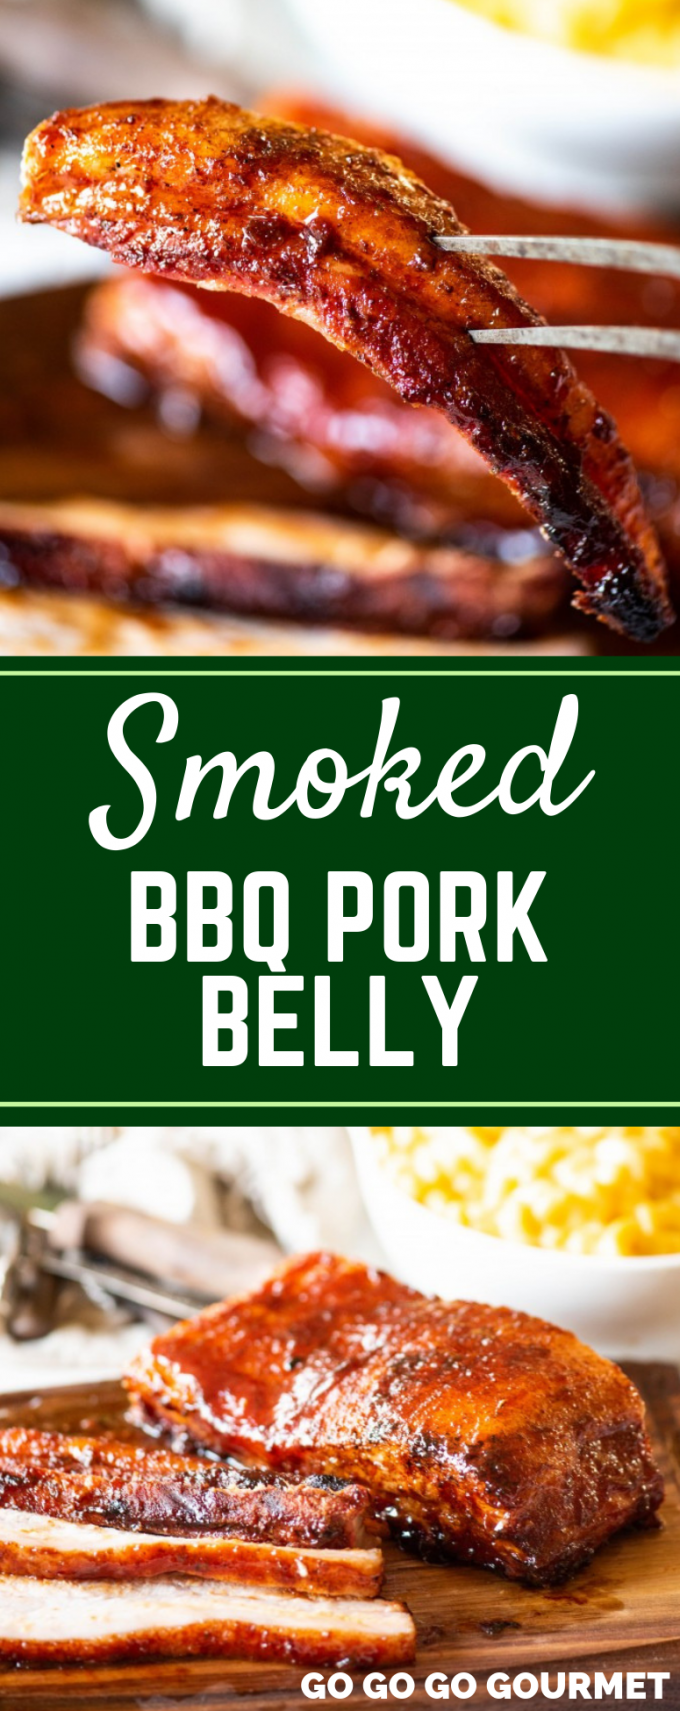 Using your Traeger smokers, this Smoked BBQ Pork Belly is the even better than burnt ends! You can cut it into slices or strips to put on tacos or even a sandwich! The options for meals are endless for one of the best pork recipes ever! #gogogogourmet #smokedbbqporkbelly #smokerrecipes #easybbqrecipes via @gogogogourmet